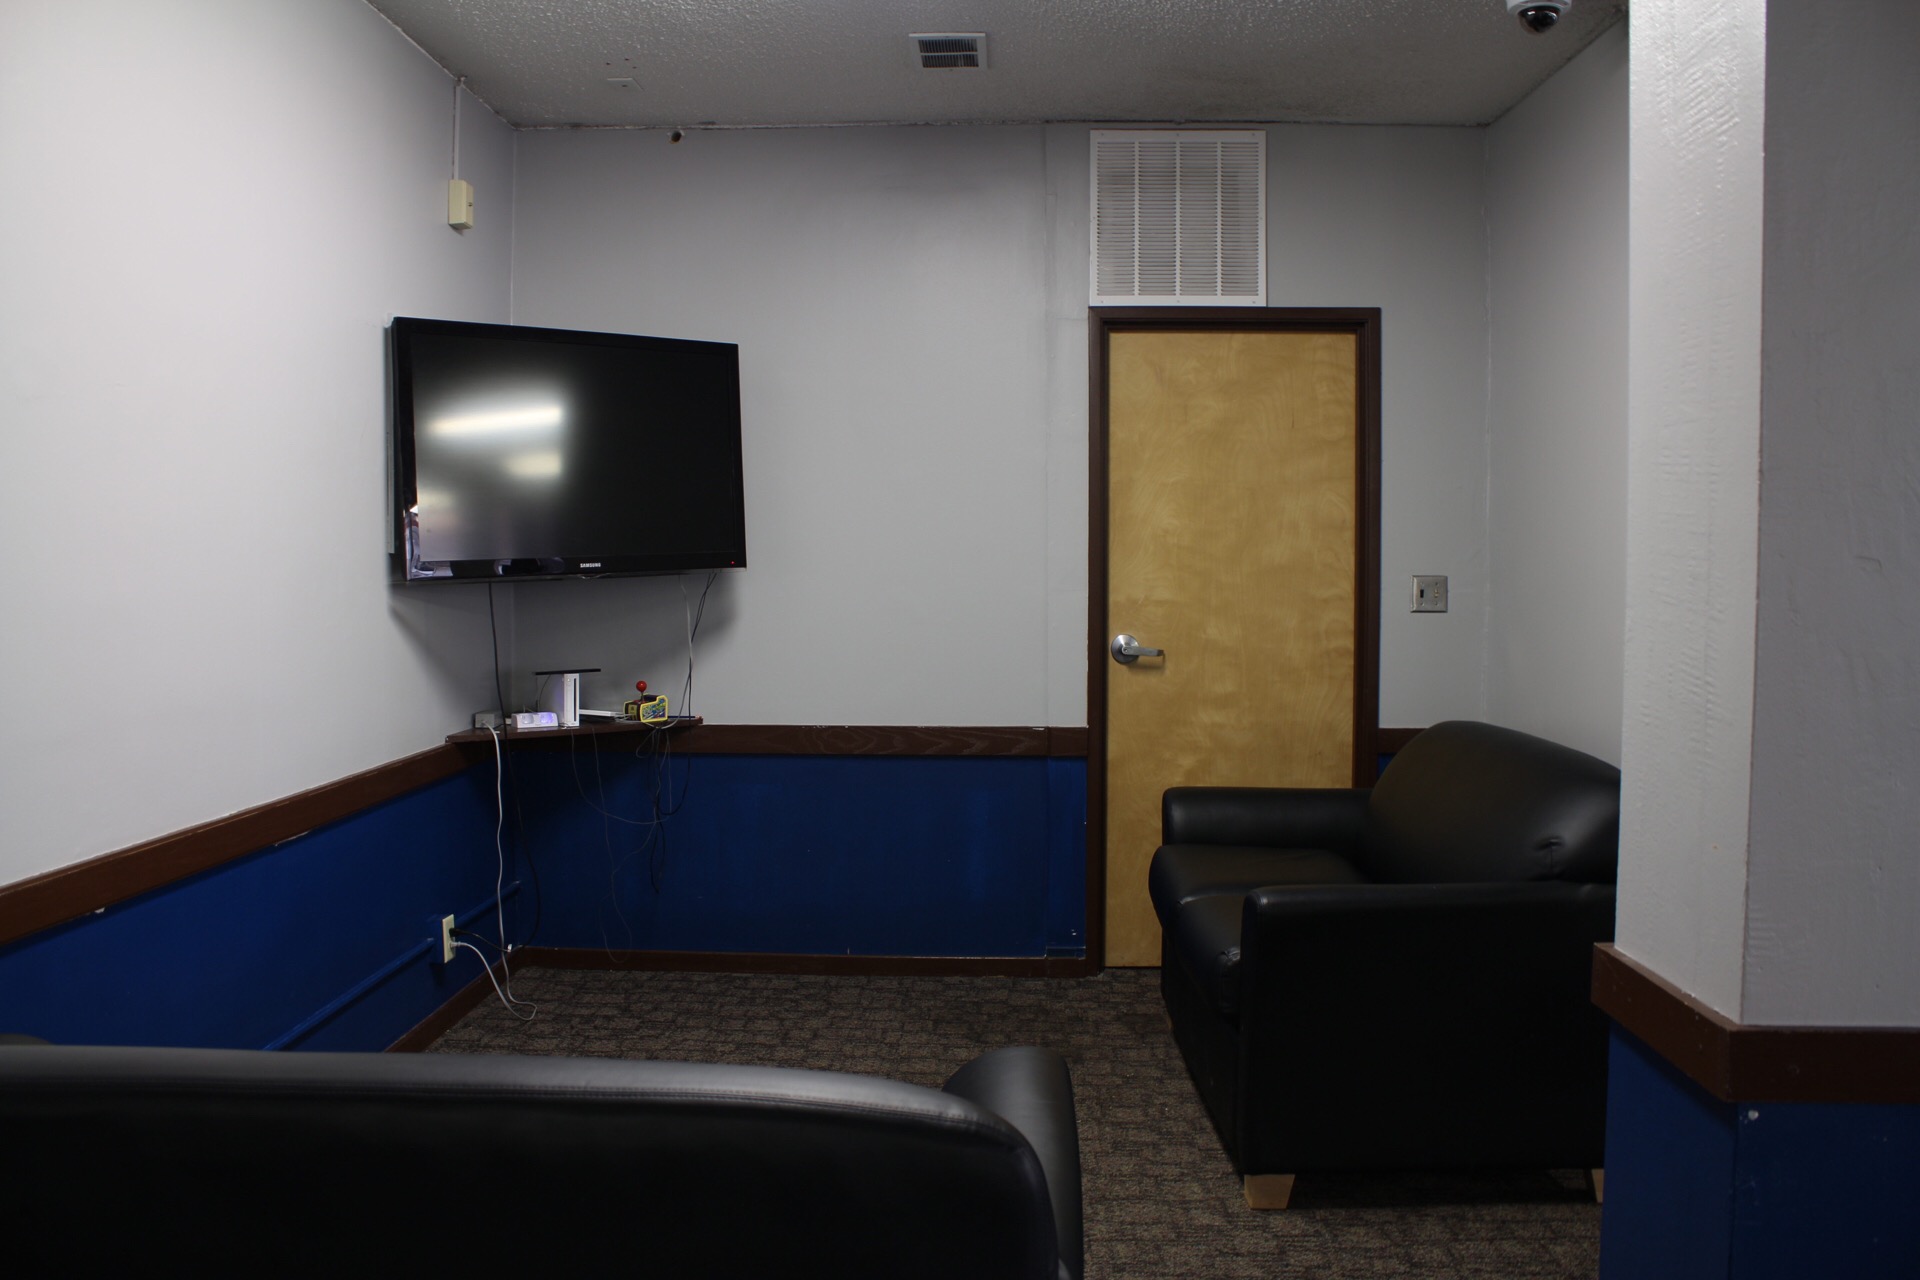 Game Room showing a corner mounted tv, consoles and couches for video games.